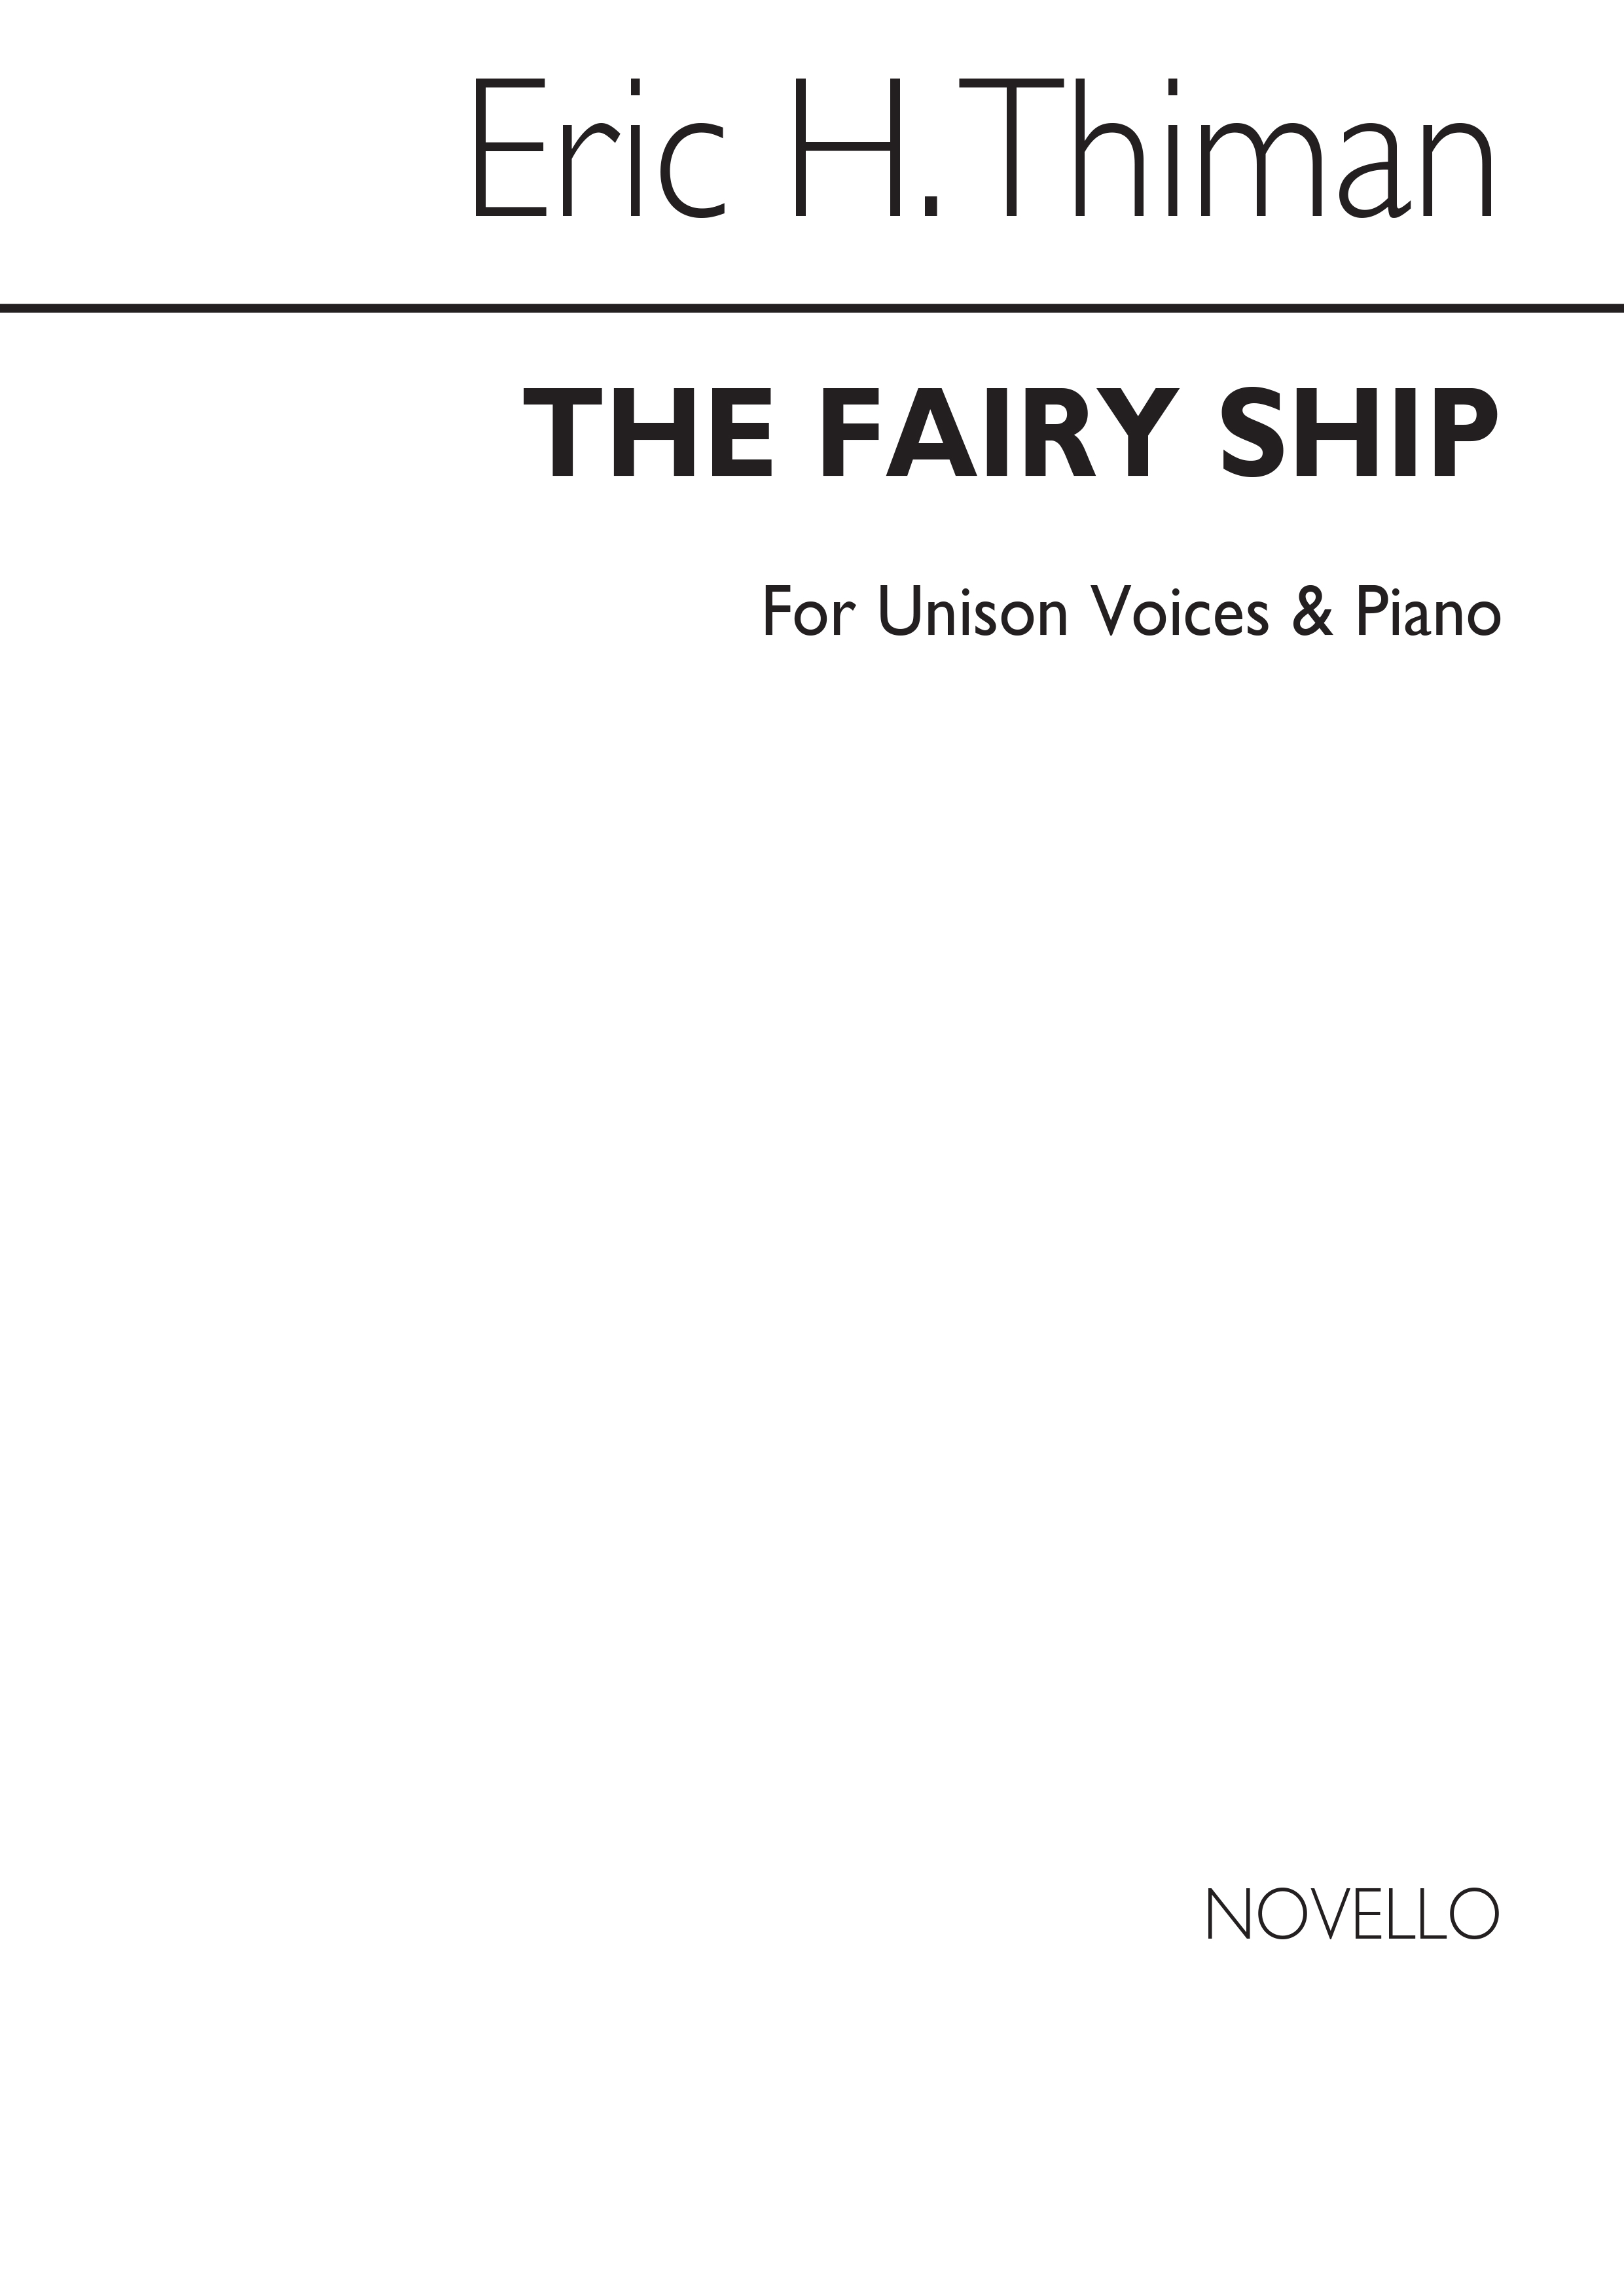 Eric Thiman: The Fairy Ship for Unison Voices and Piano: Voice: Vocal Score